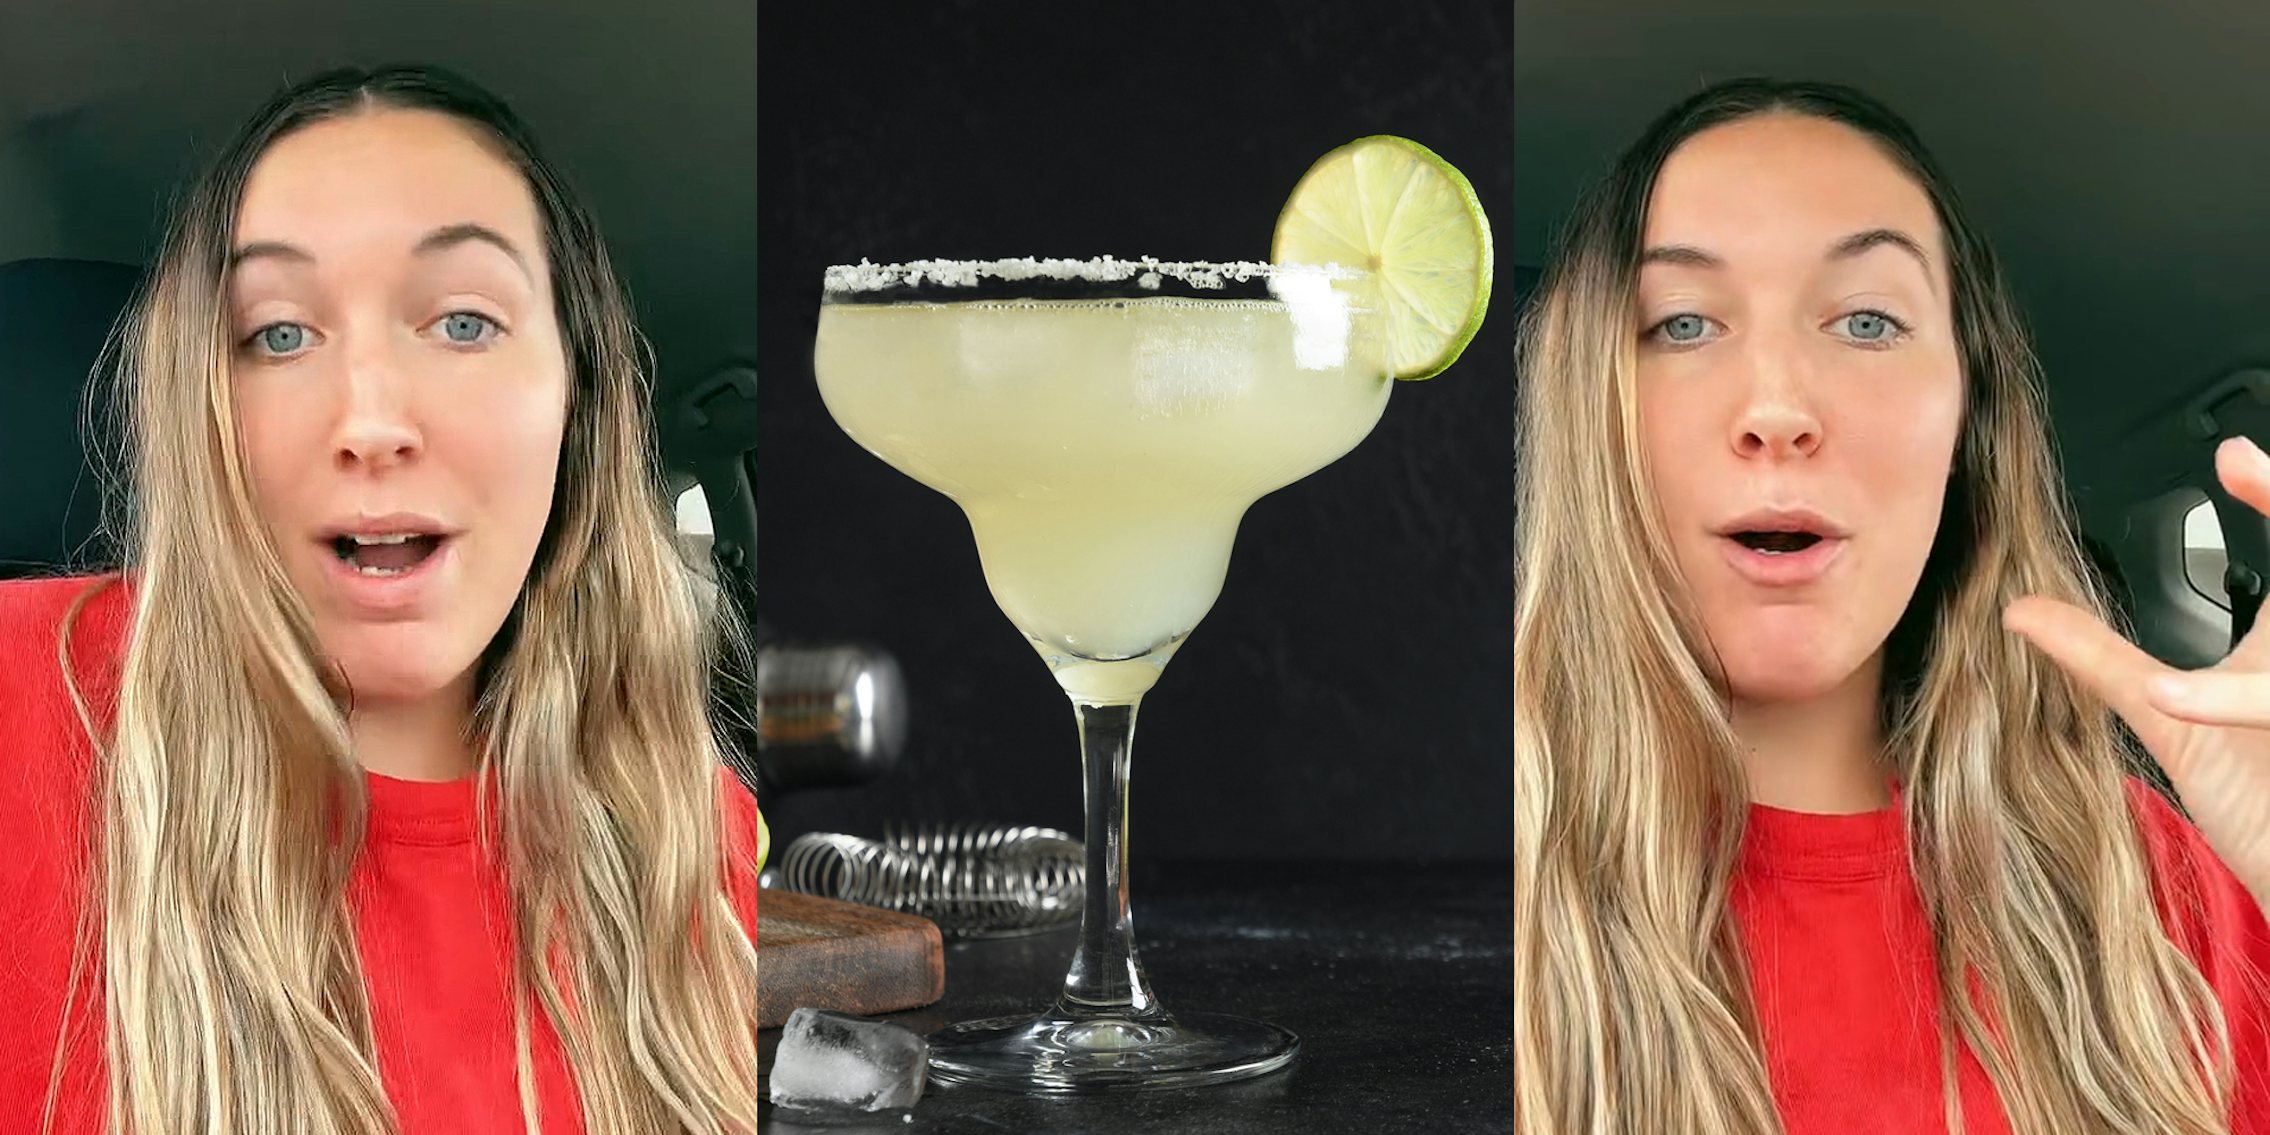 woman speaking in car (l) Margarita with lime wedge on black background (c) woman speaking in car hand up (r)